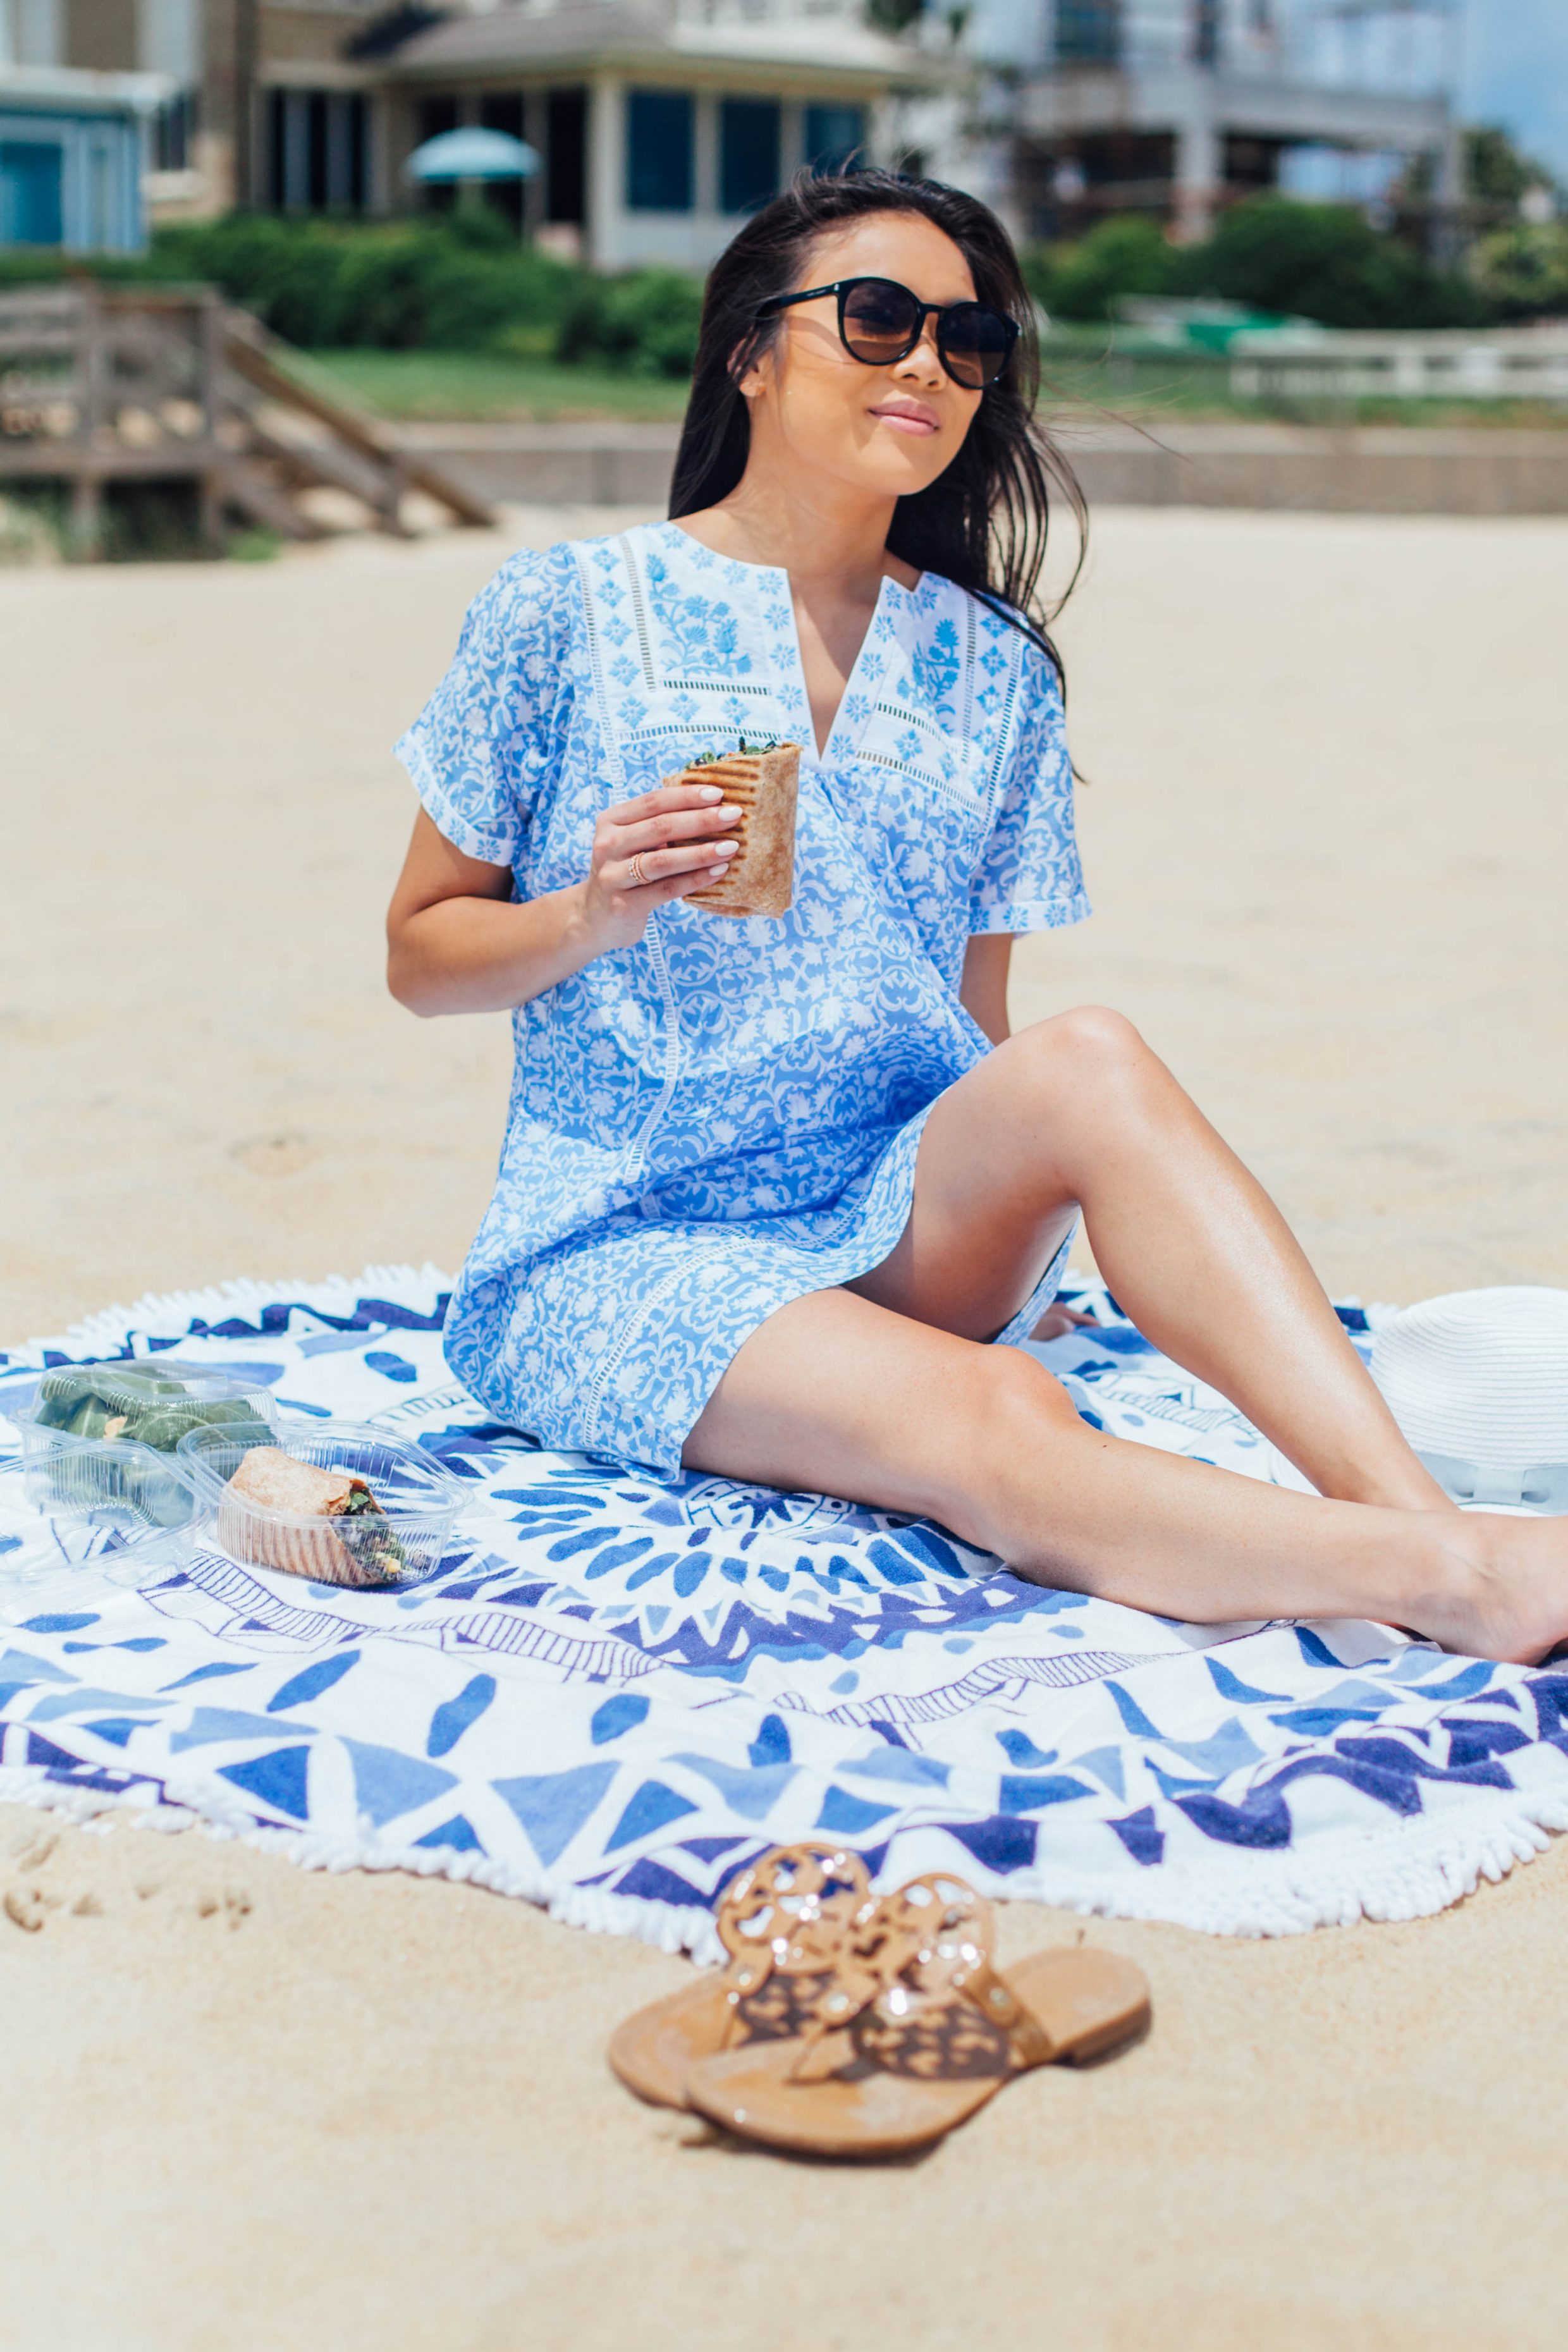 COLOR & CHIC | The perfect blue cover-up dress